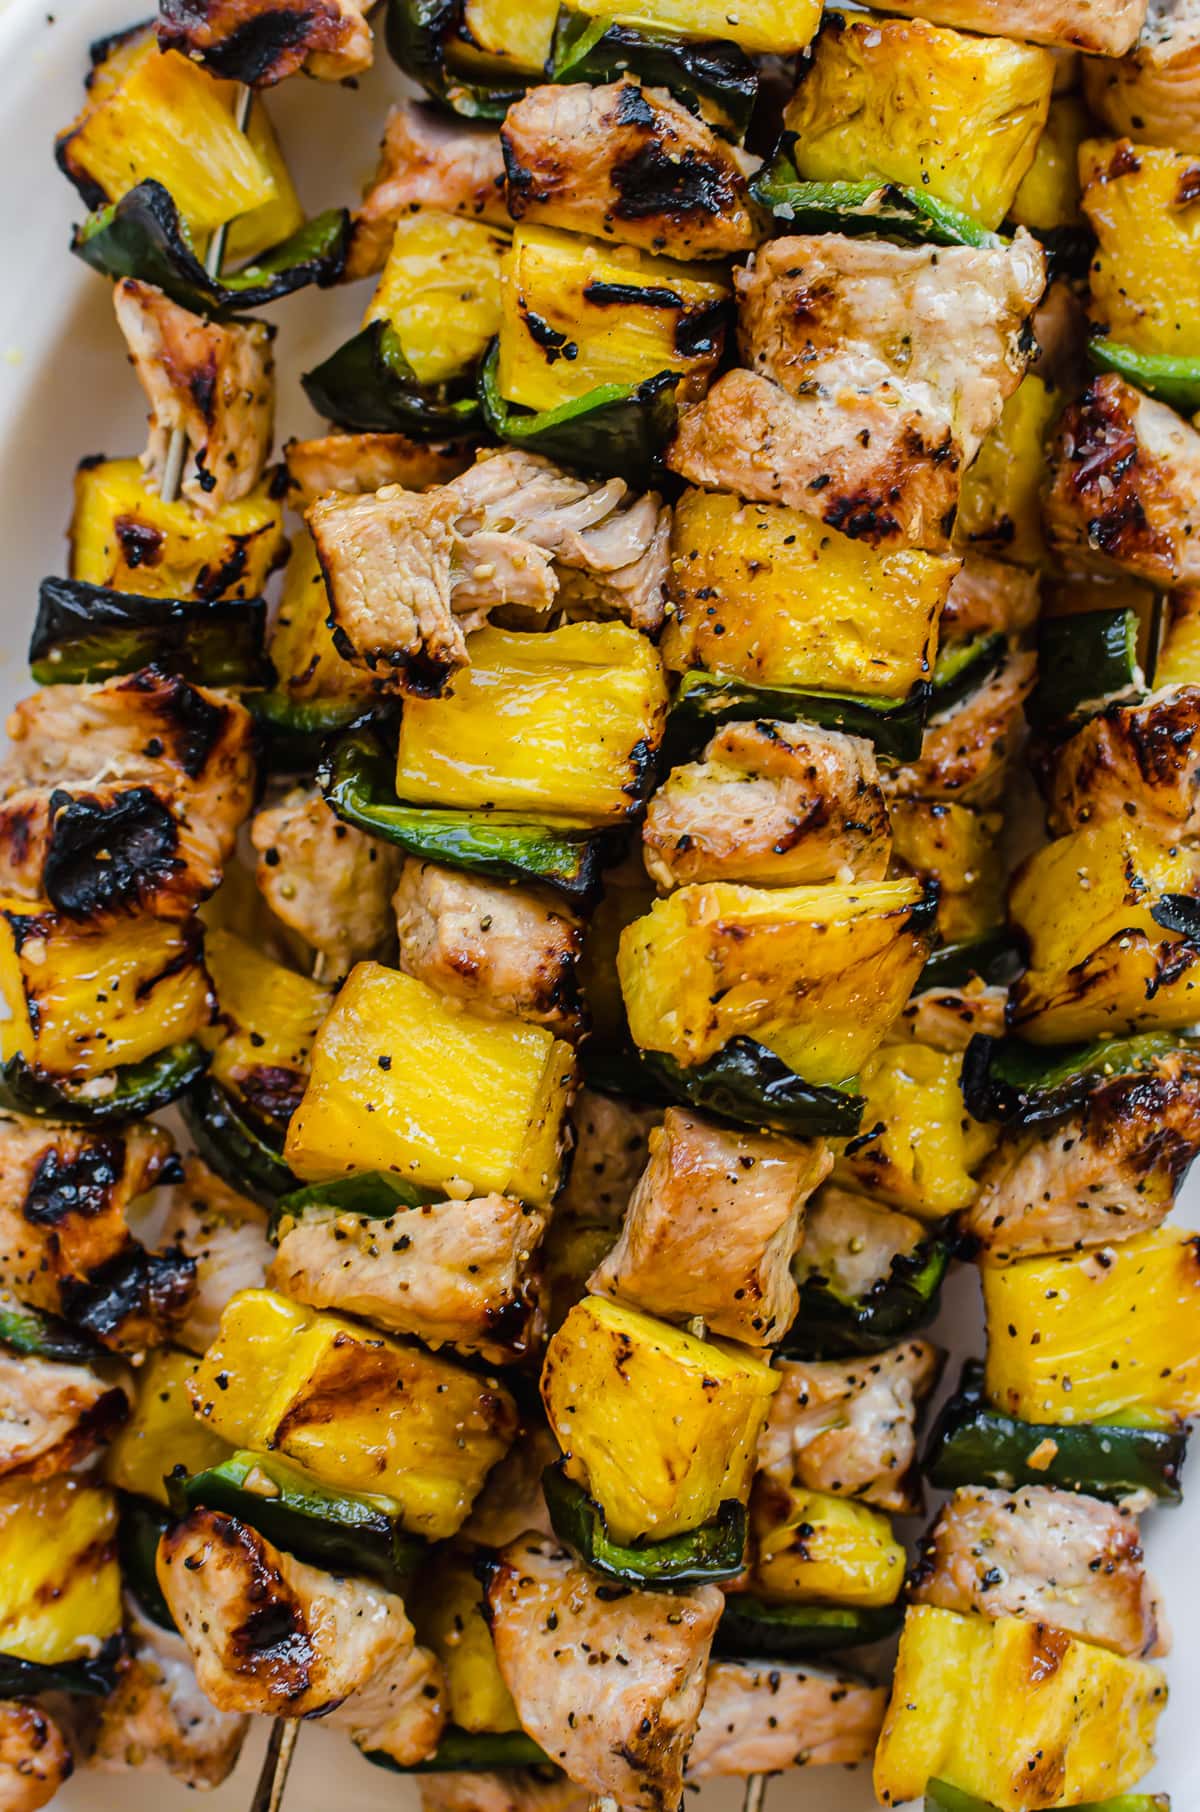 A close up shot of grilled pork kabobs with pineapple.